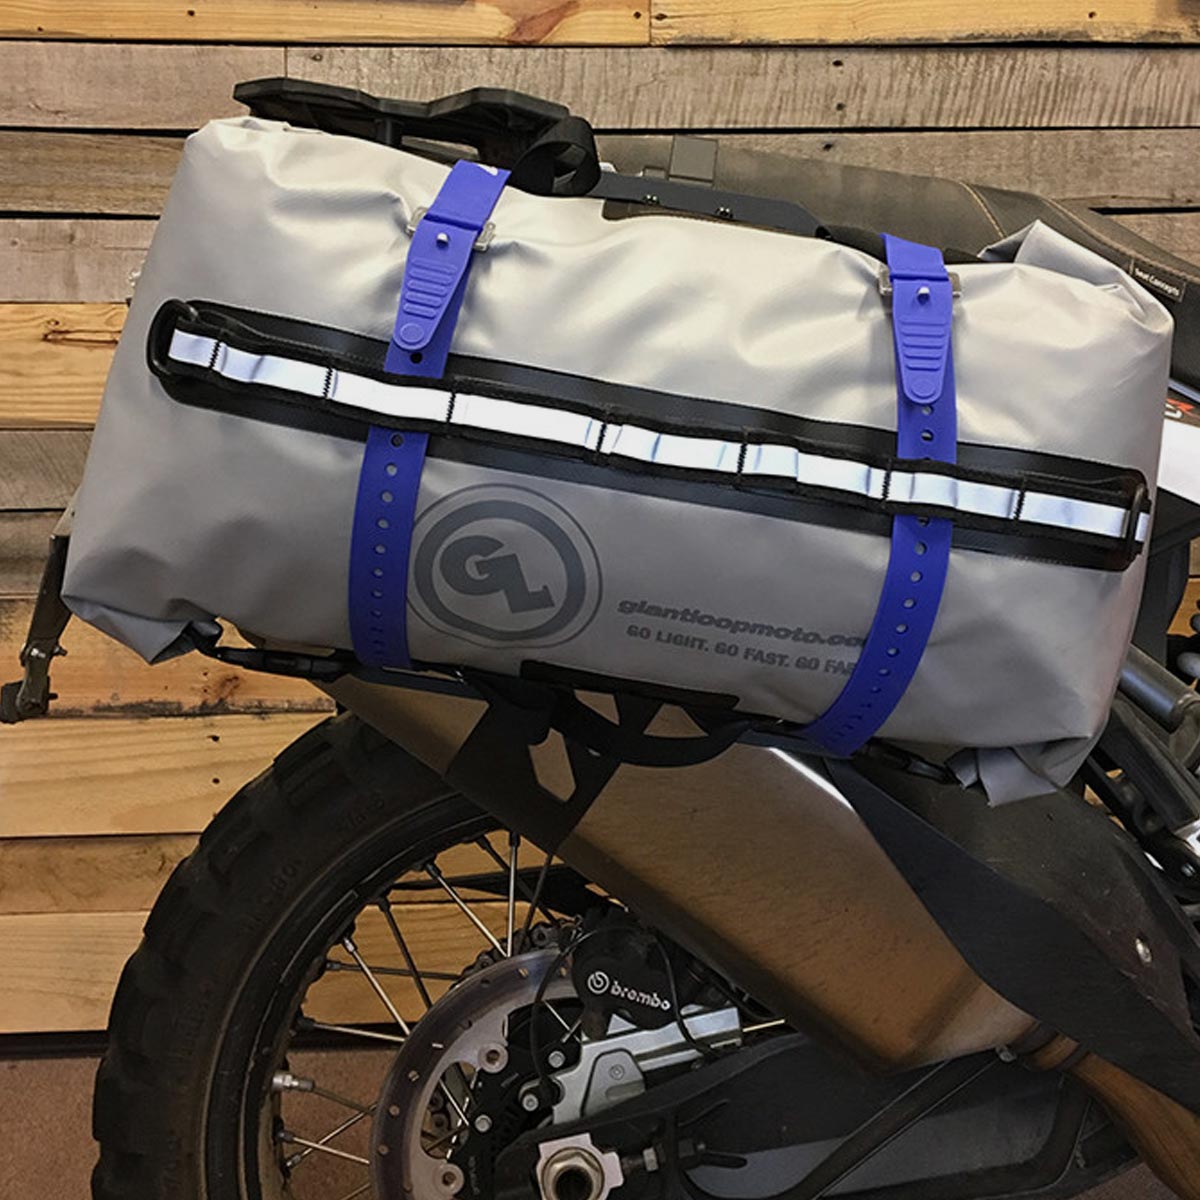 PANNIER MOUNTS FOR MOTORCYCLE SOFT LUGGAGE Giant Loop